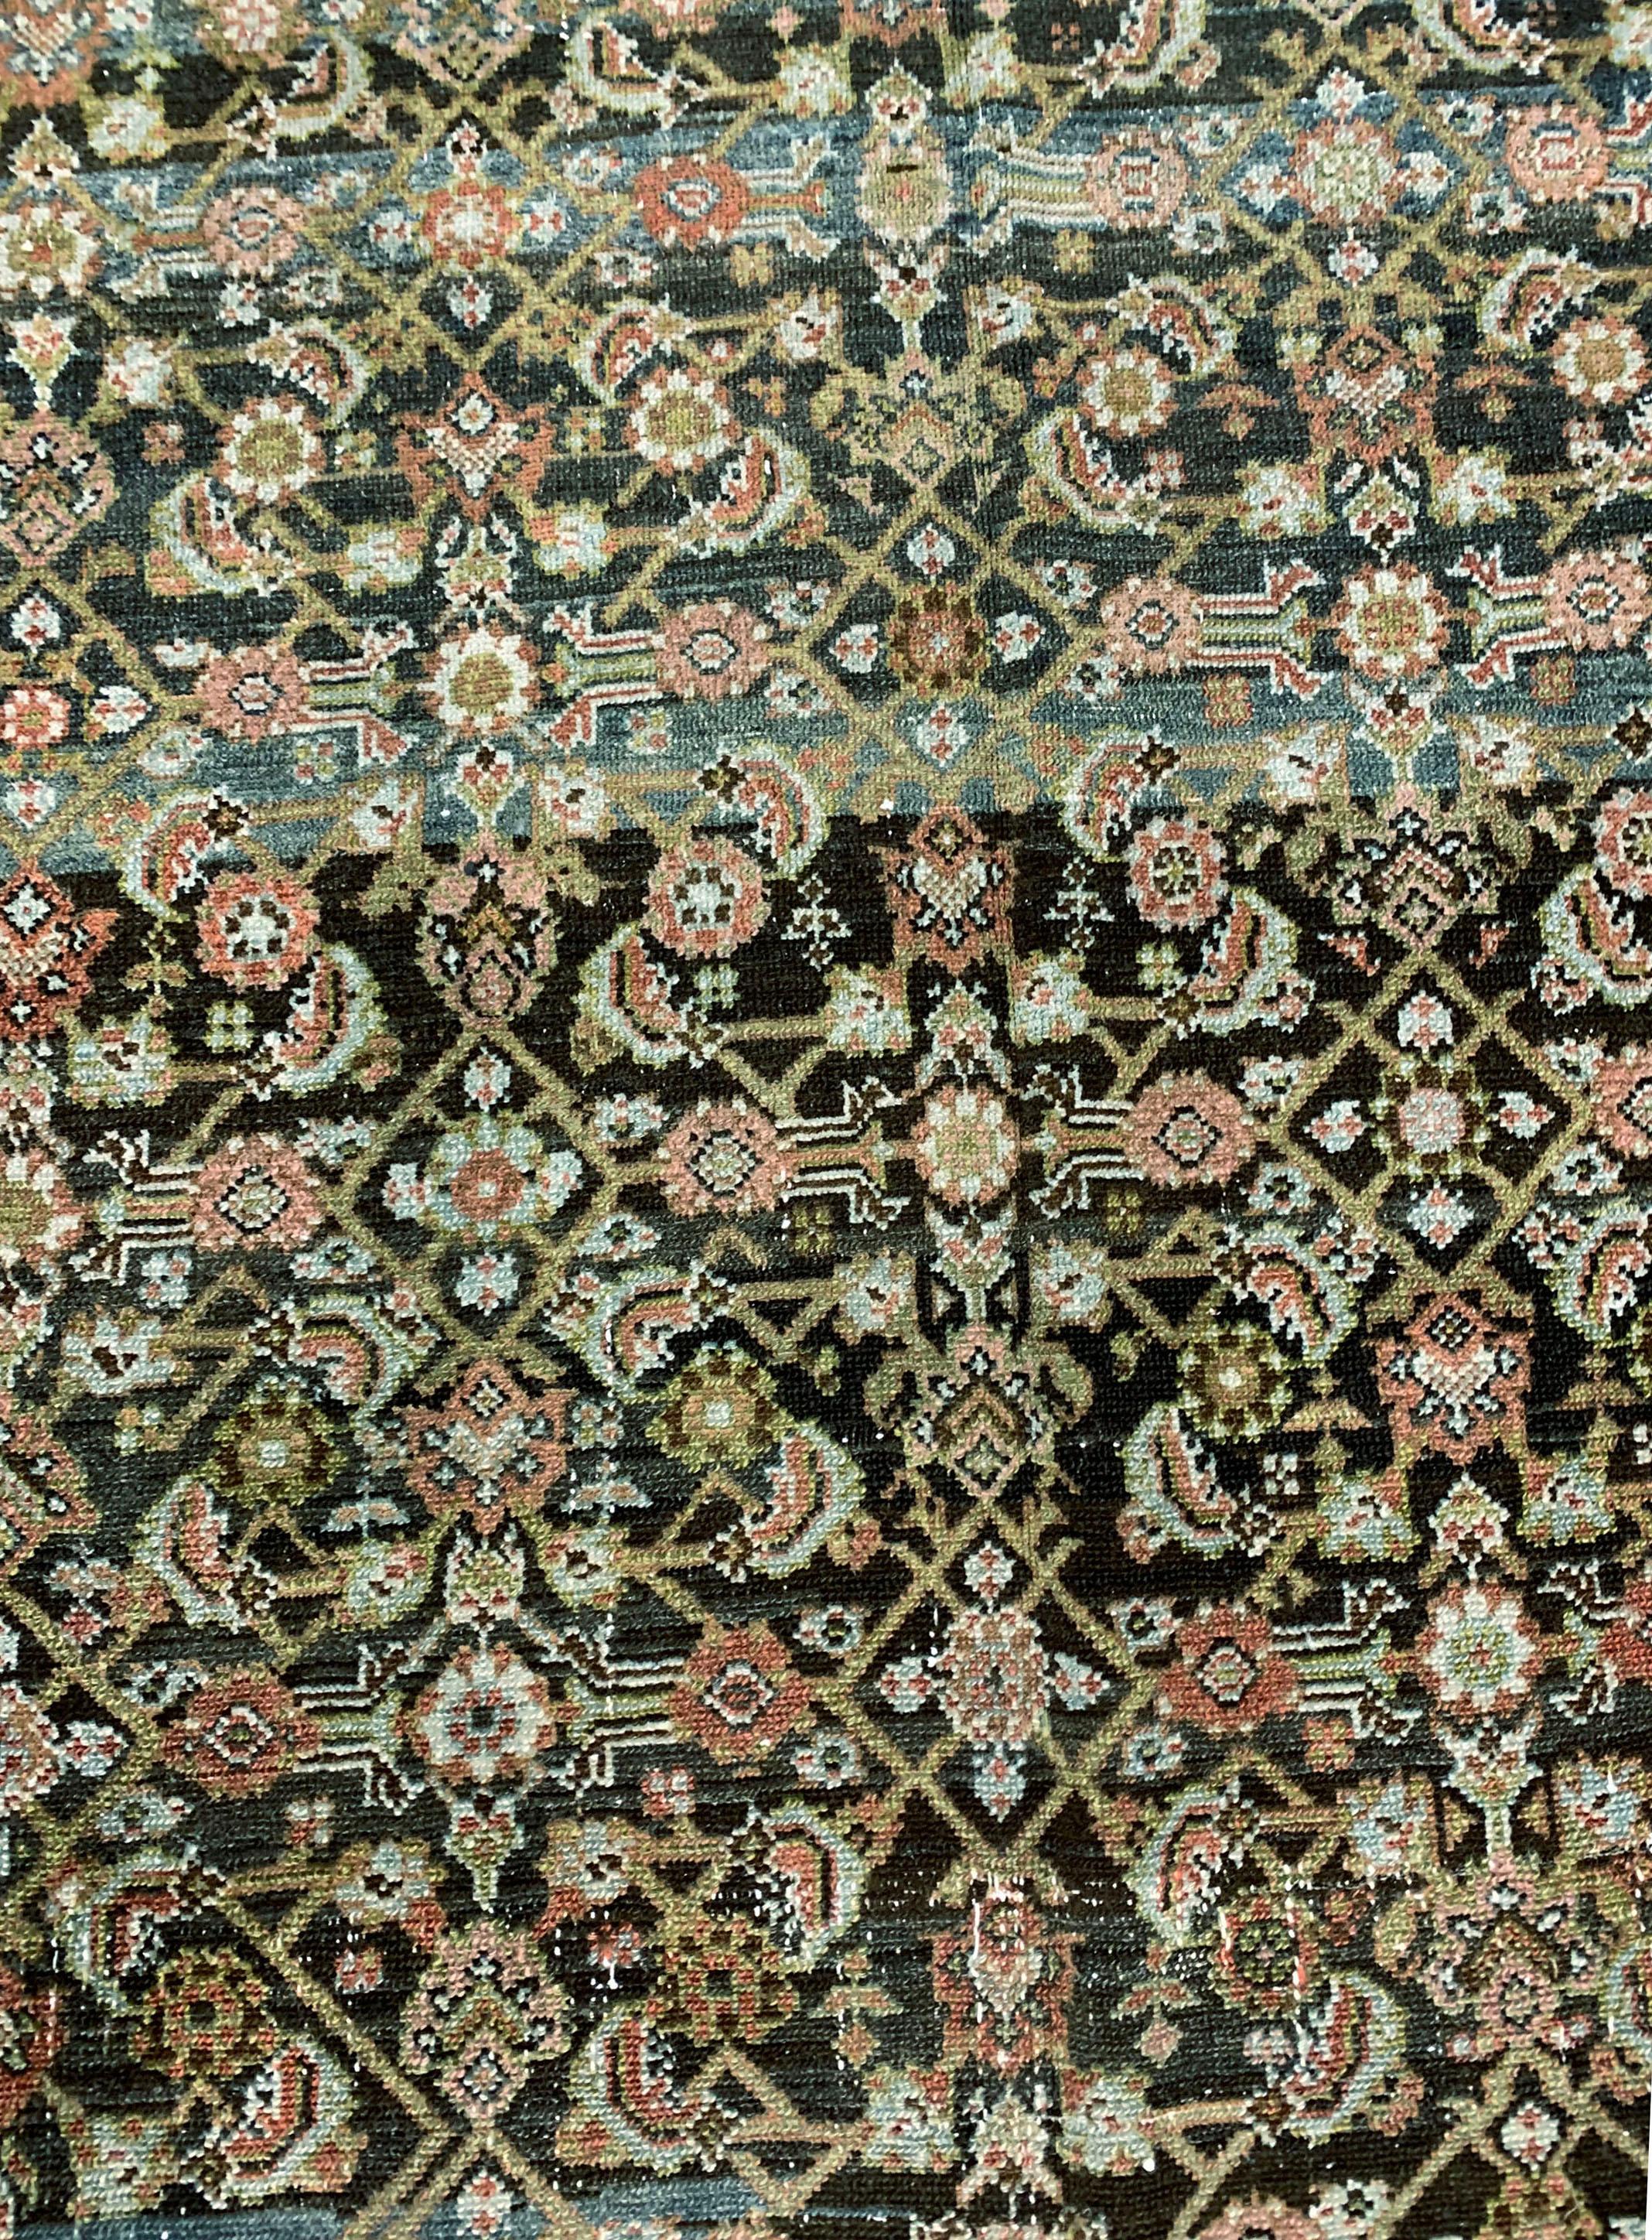 Antique Persian Malayer rug Runner 6'2 x 24'8. This Malayer is in a hard-to-find size and works so well as a runner or corridor rug. The floral detail in the field is truly a work of art and must have been woven by expert weavers to get such fine